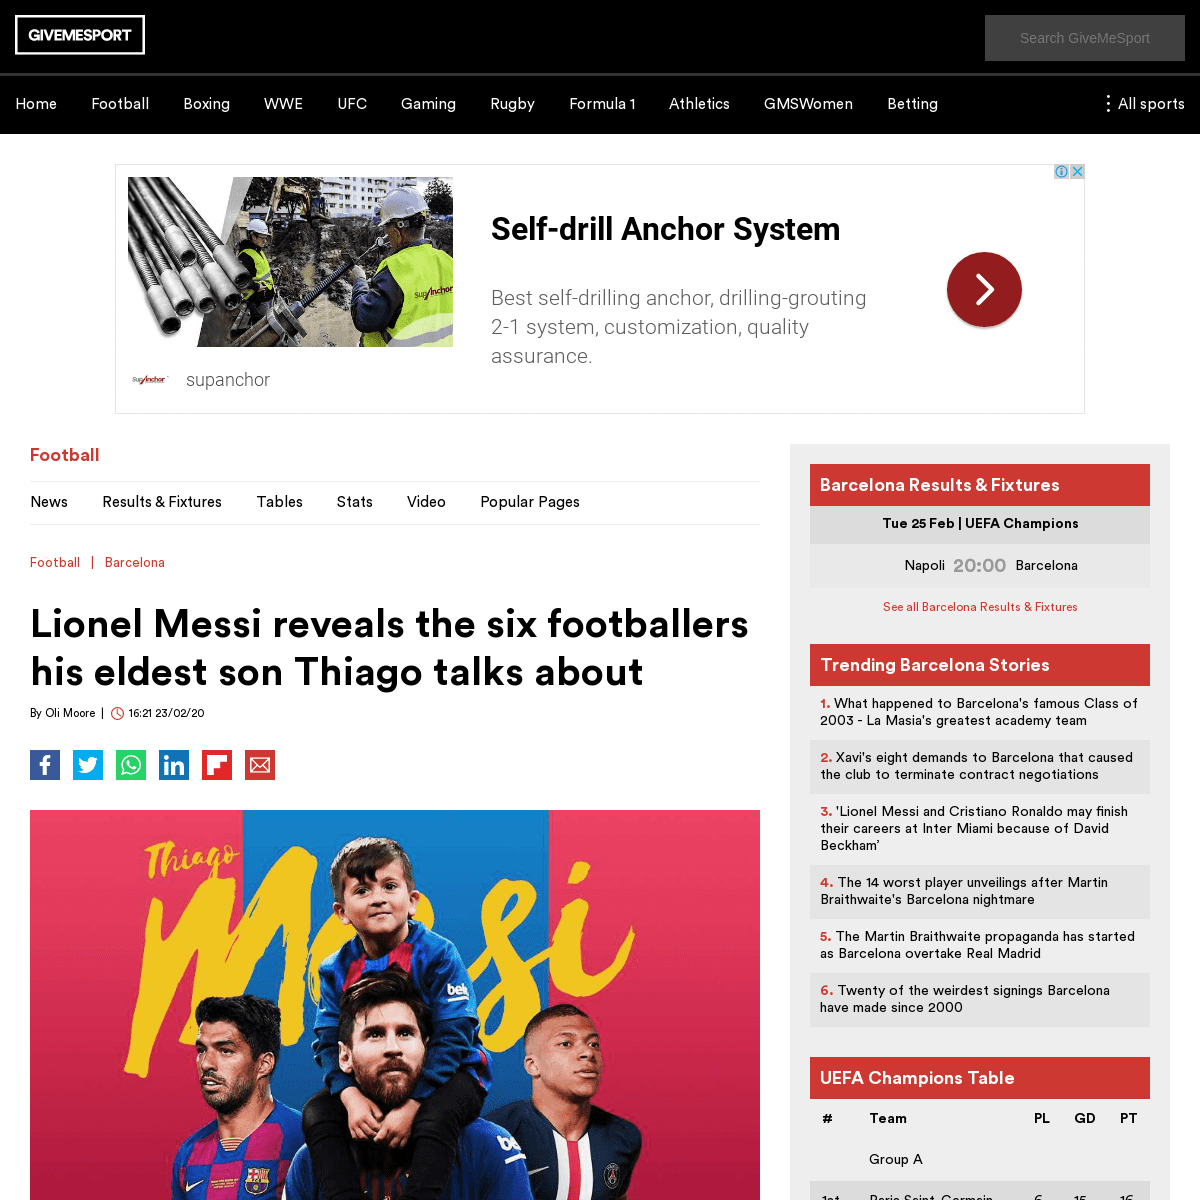 A complete backup of www.givemesport.com/1549398-lionel-messi-reveals-the-six-footballers-his-eldest-son-thiago-talks-about